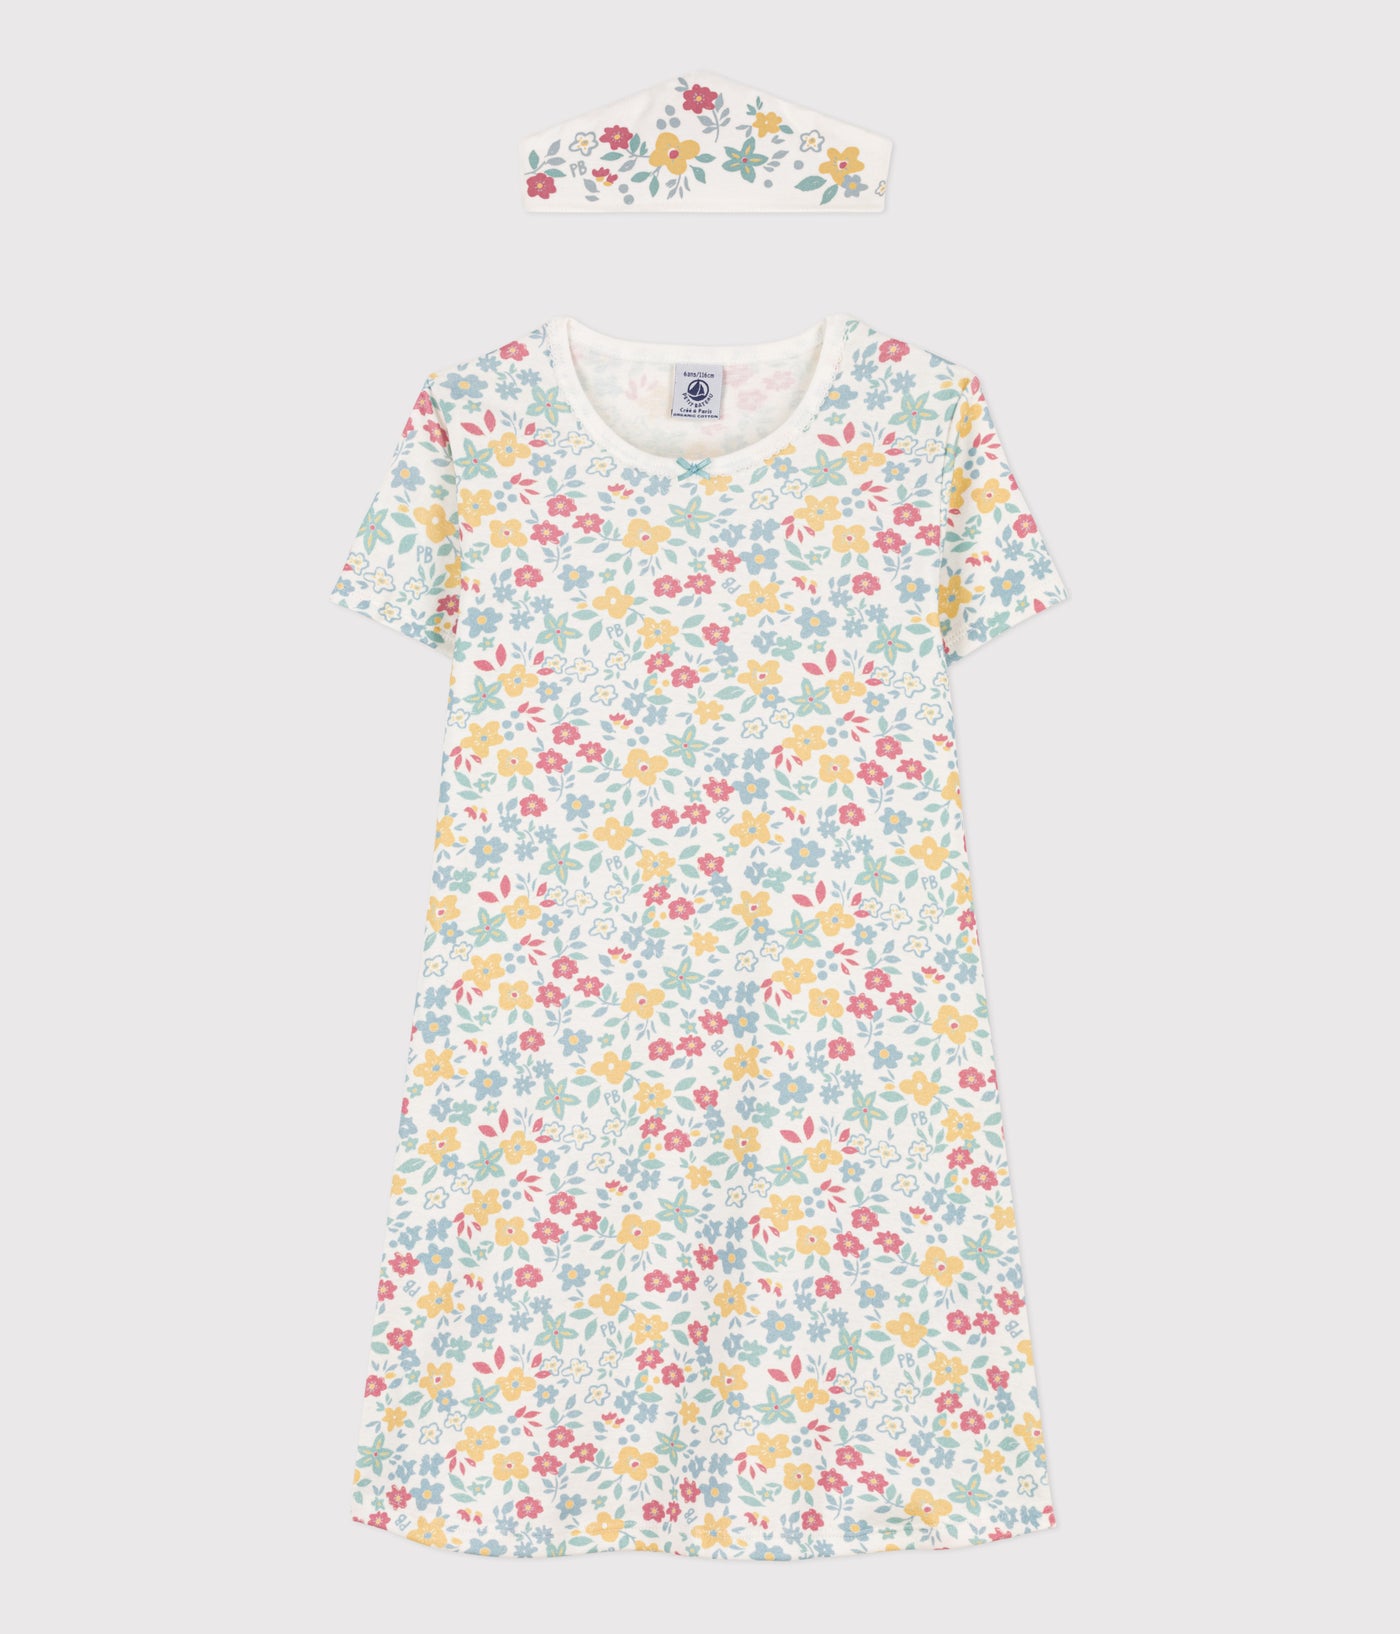 GIRLS' FLORAL PRINT COTTON NIGHTDRESS WITH CROWN